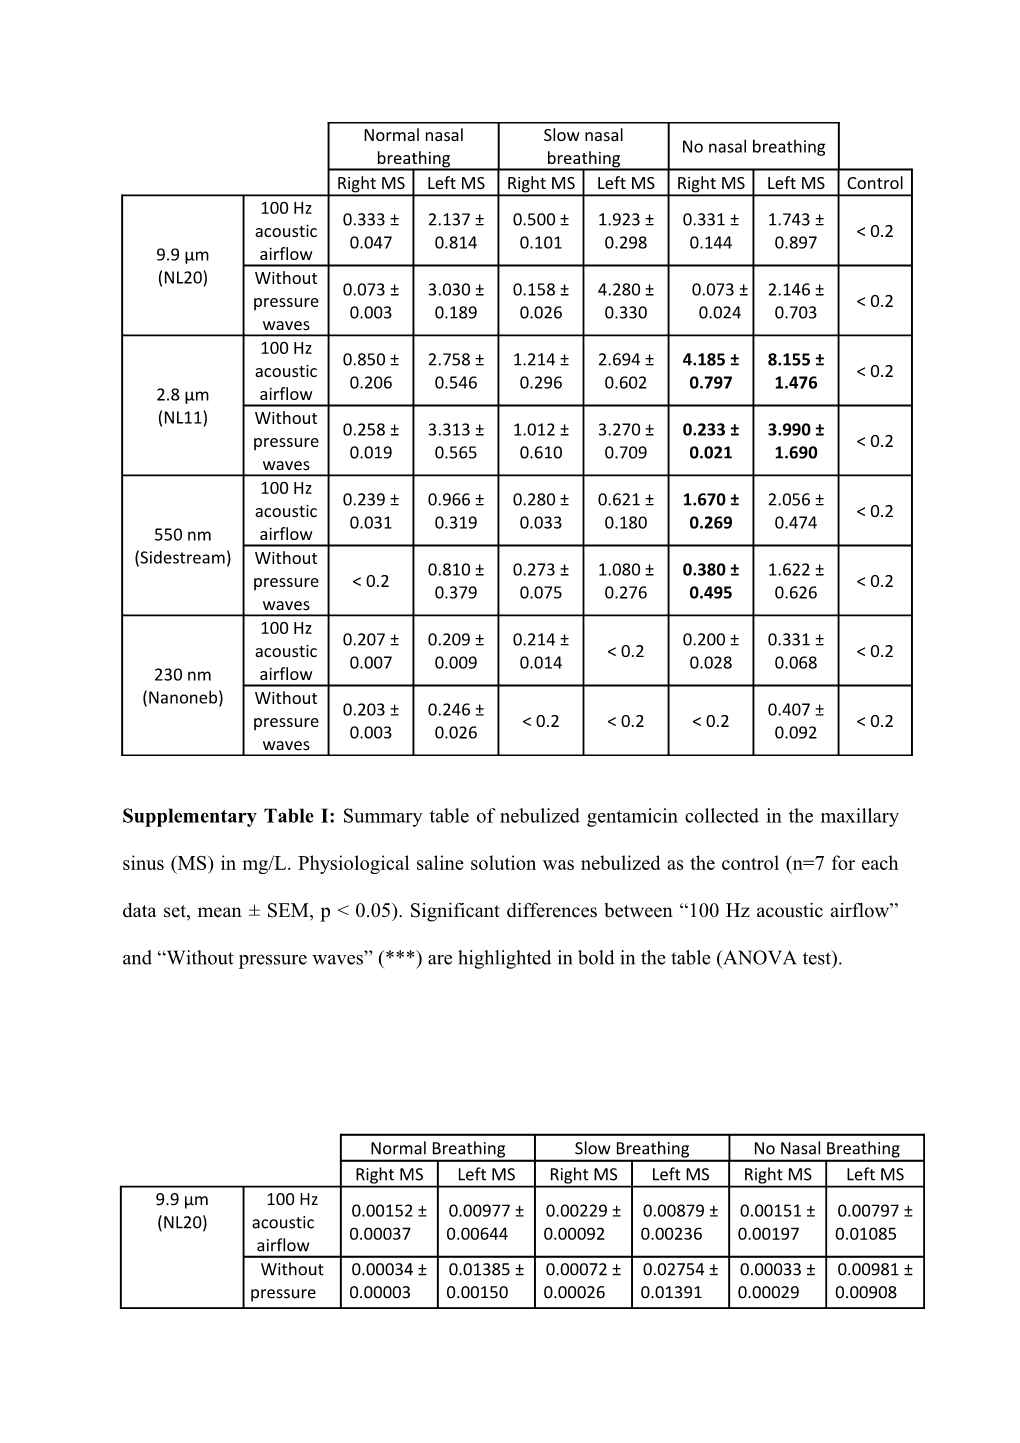 Supplementary Table I: Summary Table of Nebulized Gentamicin Collected in the Maxillary